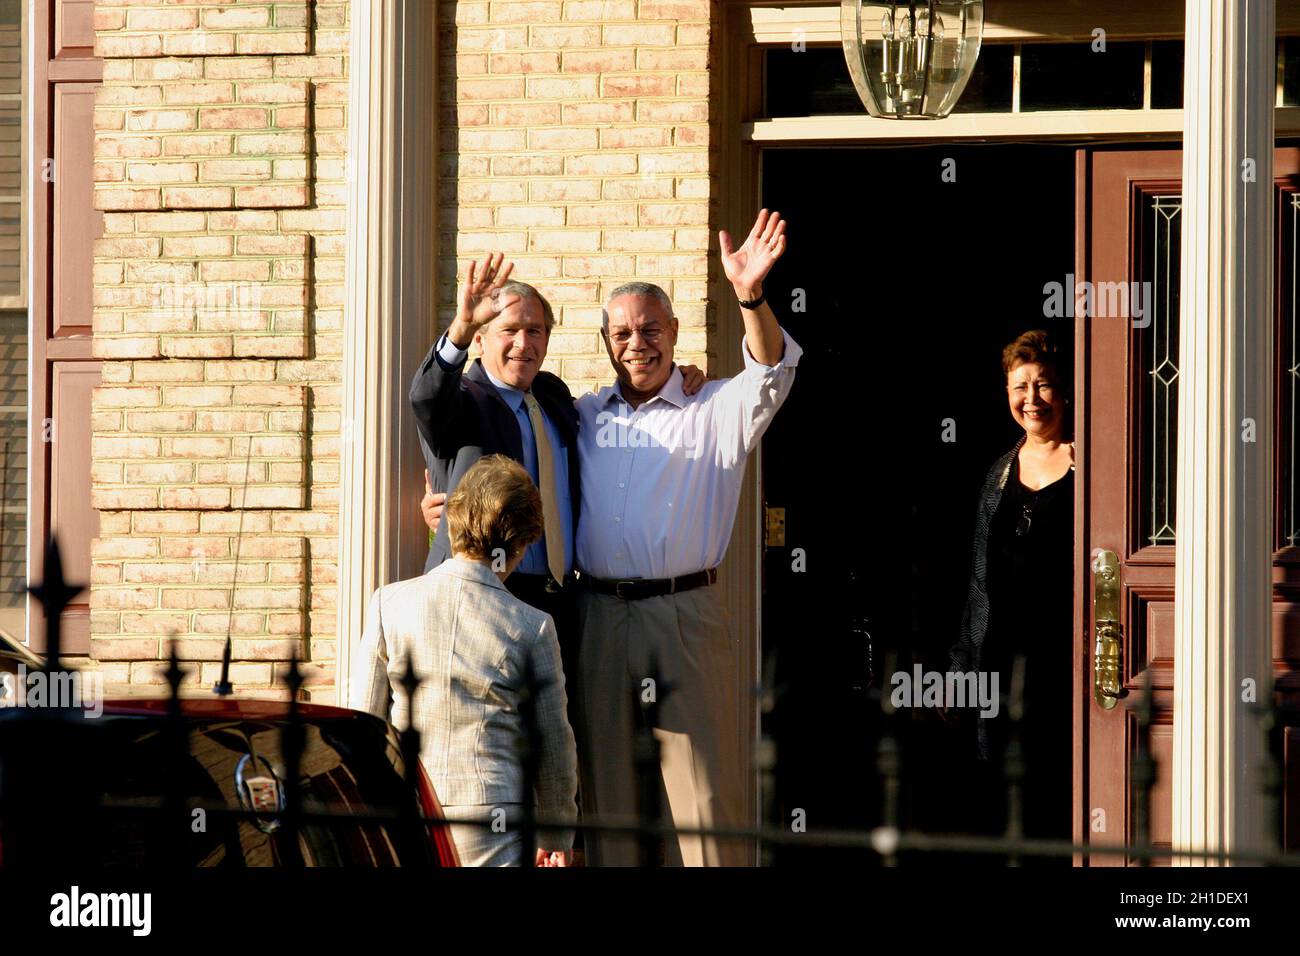 McLean, VA - May 31, 2005 -- On short notice, United States President George W. Bush and first lady Laura Bush went to the home of former Secretary of State Colin L. Powell and his wife Alma. Powell was dressed in a light-colored dress shirt and khakis (no jacket or tie). The President embraced him and, turning to wave at the cameras, removed his suit jacket and grinned. The first lady wore a light-colored pantsuit. The dinner was private, with just the two couples. Credit: Martin H. Simon - Pool via CNP Stock Photo